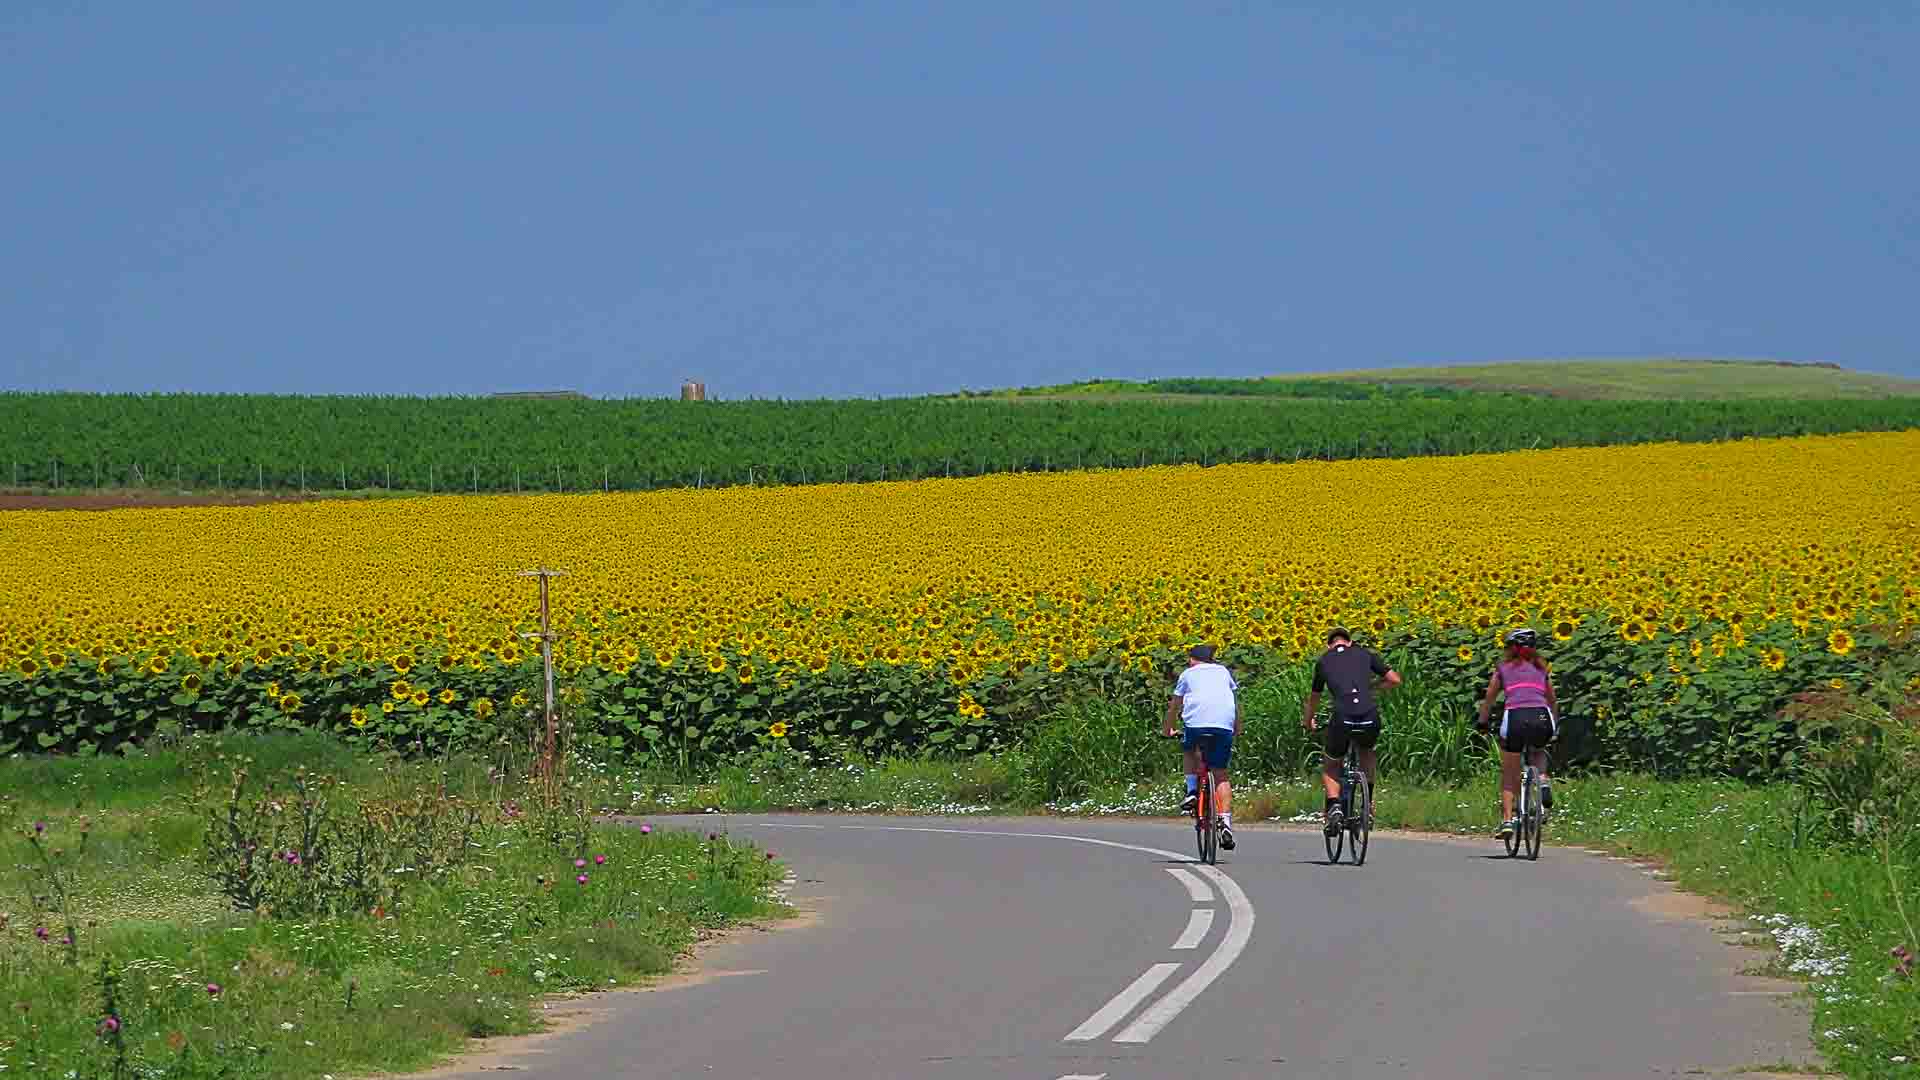 Cyclists on a road next to field of sunflowers